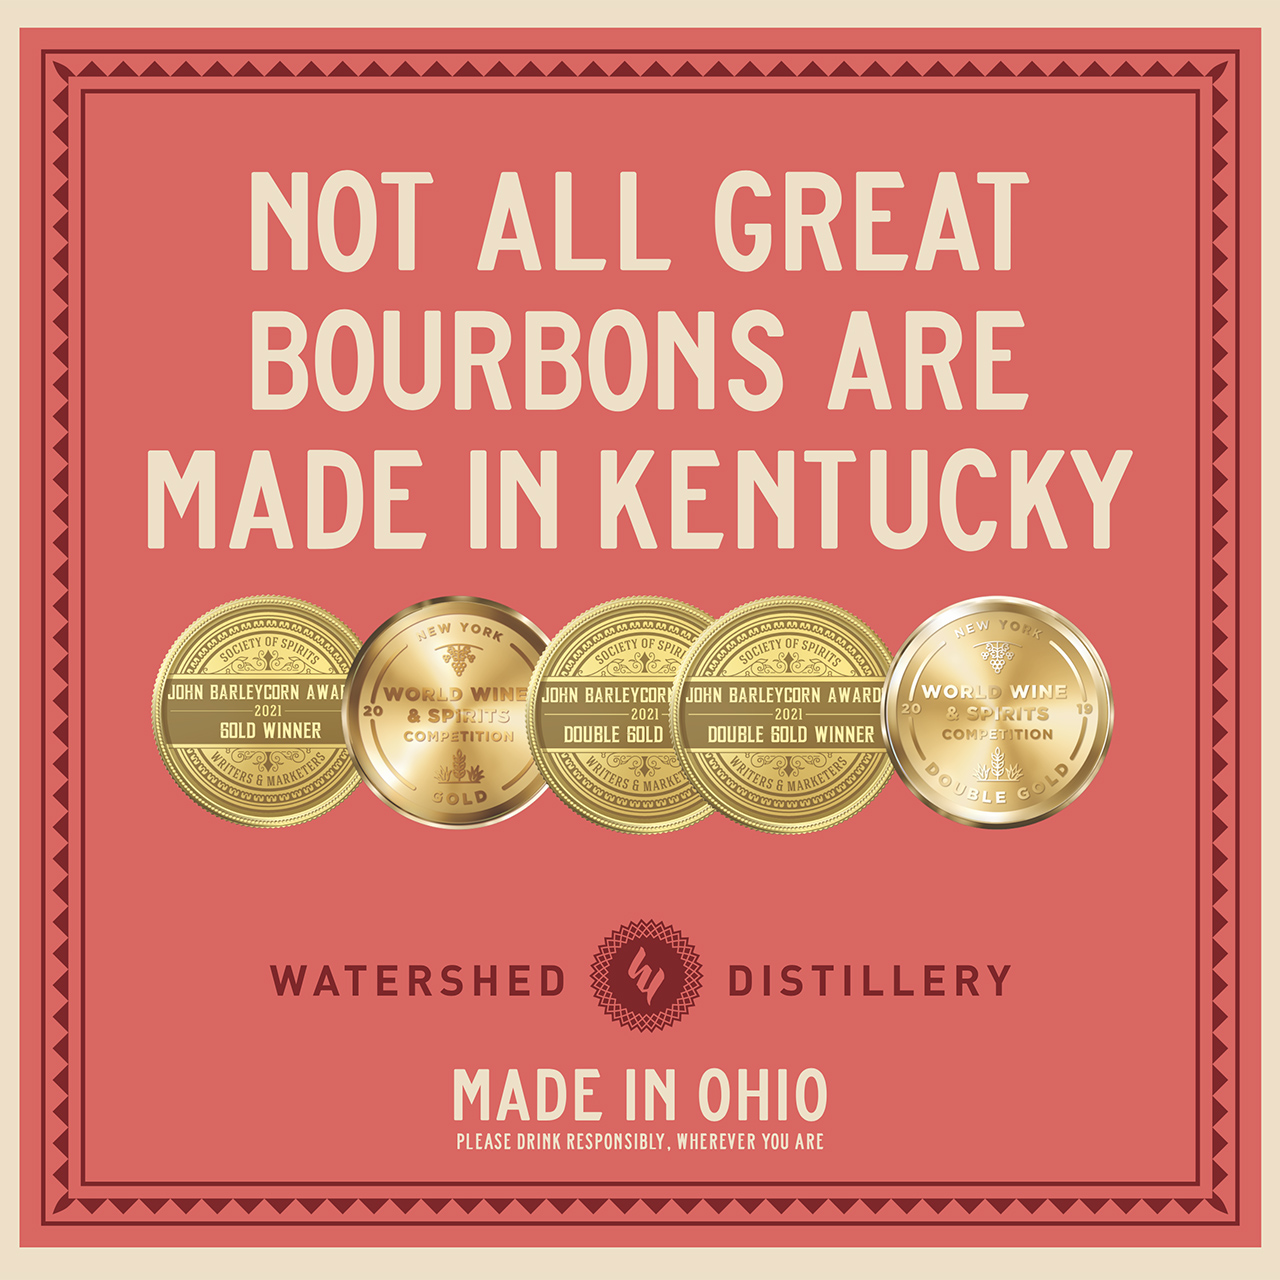 watershed-bourbon-2_1280x1280.png